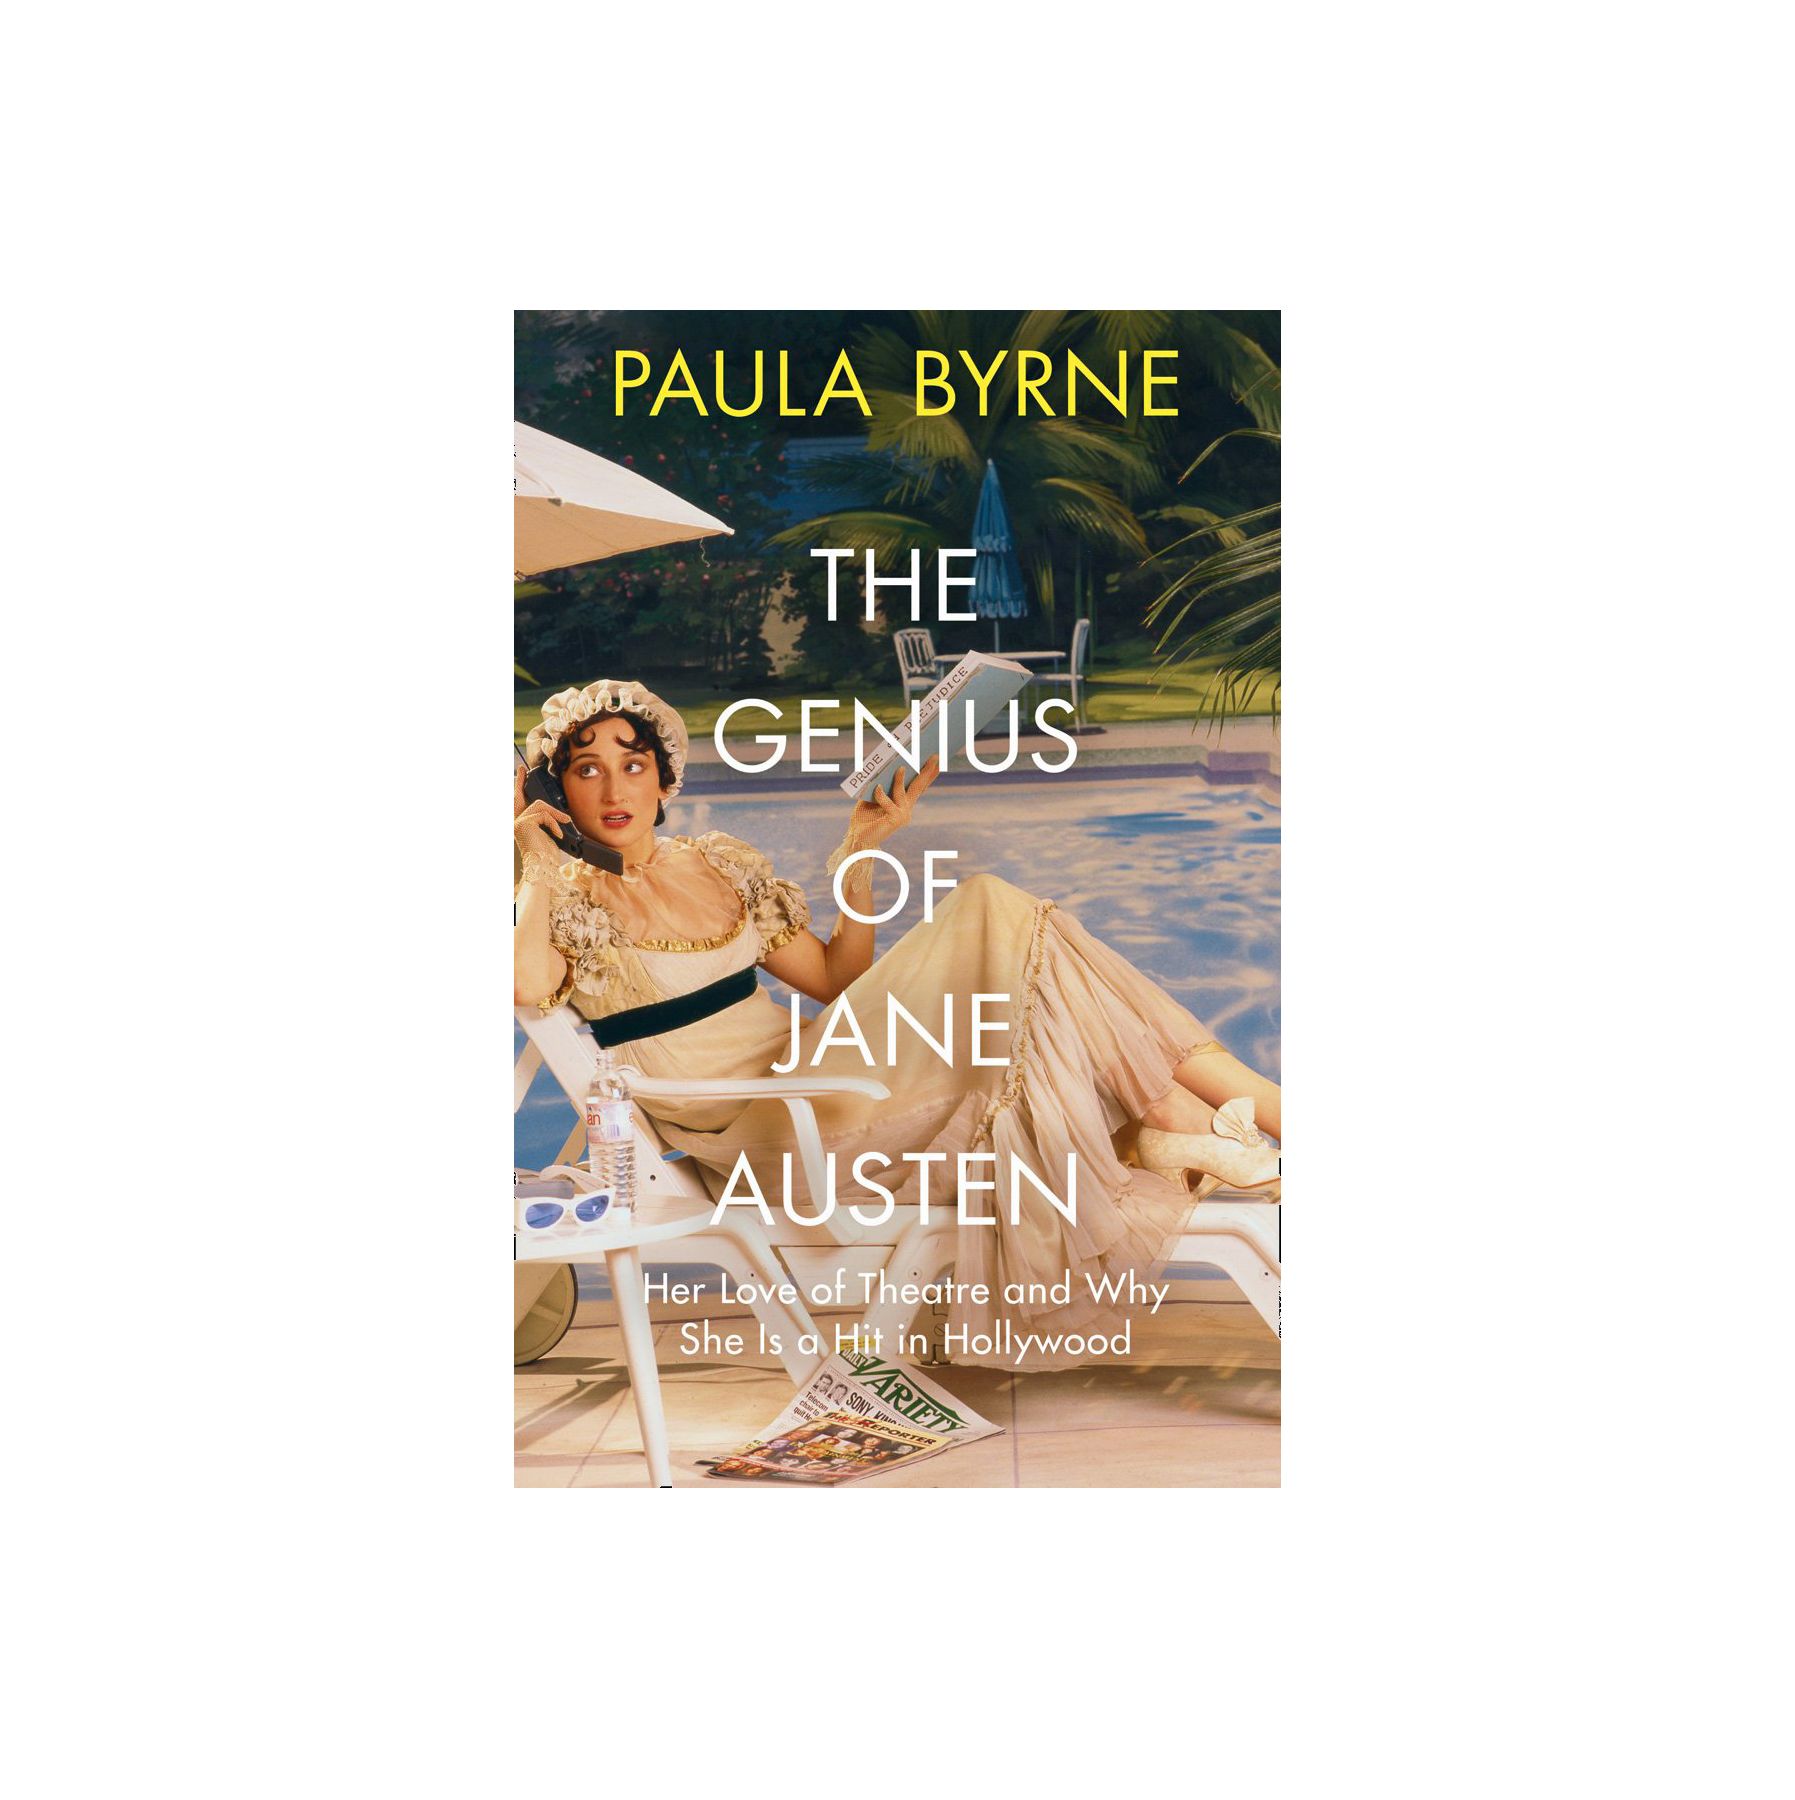 The Genius of Jane Austen: Her Love of Theatre and Why She Works in Hollywood, av Paula Byrne